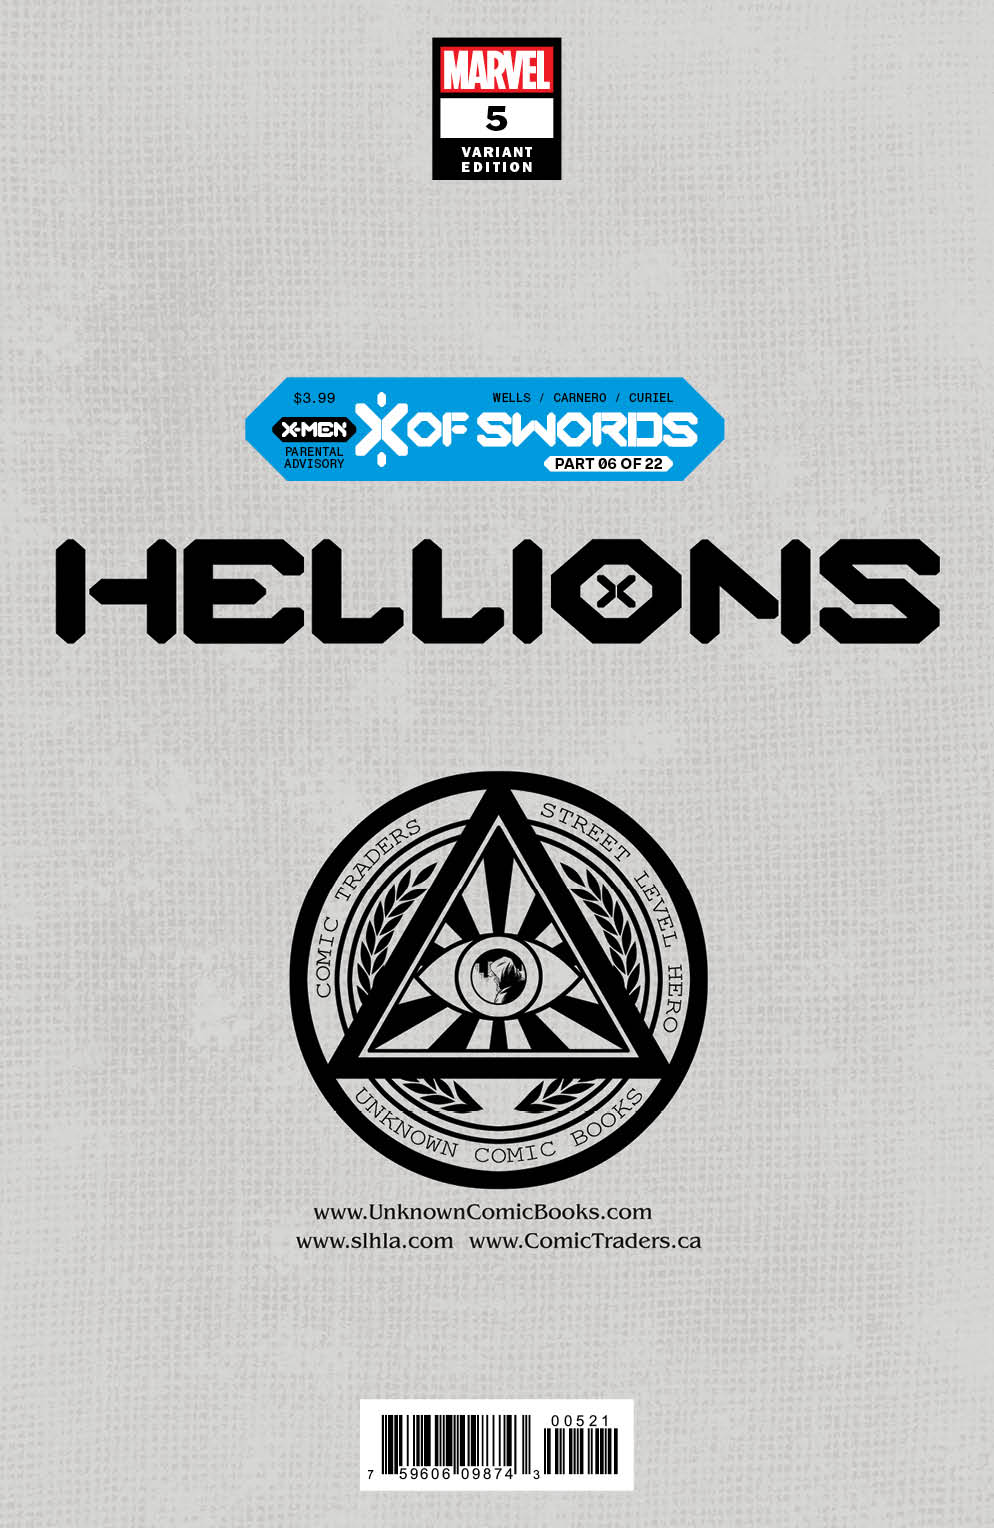 [6 PACK] HELLIONS (#1-#6) 1, 2, 3, 4, 5, 6 UNKNOWN COMICS EXCLUSIVE VAR (11/18/2020)